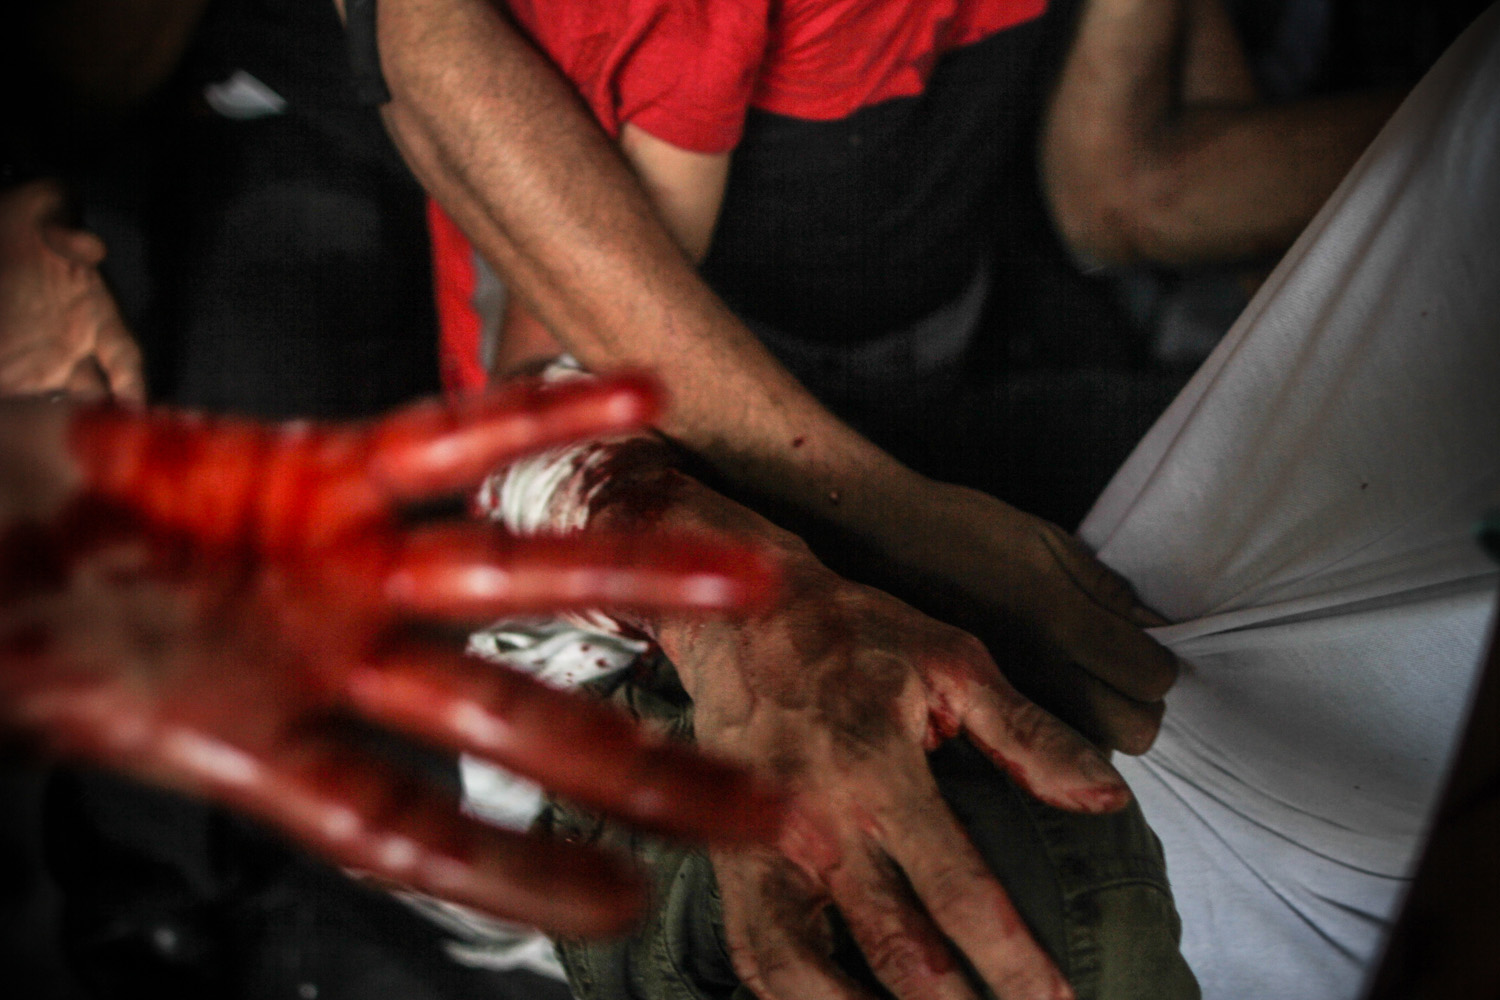 Bloodied hands are seen at Ramses square, where violent clashes broke out on the Day of Rage, the first Friday after Rabaa massacre. August 16, 2013.